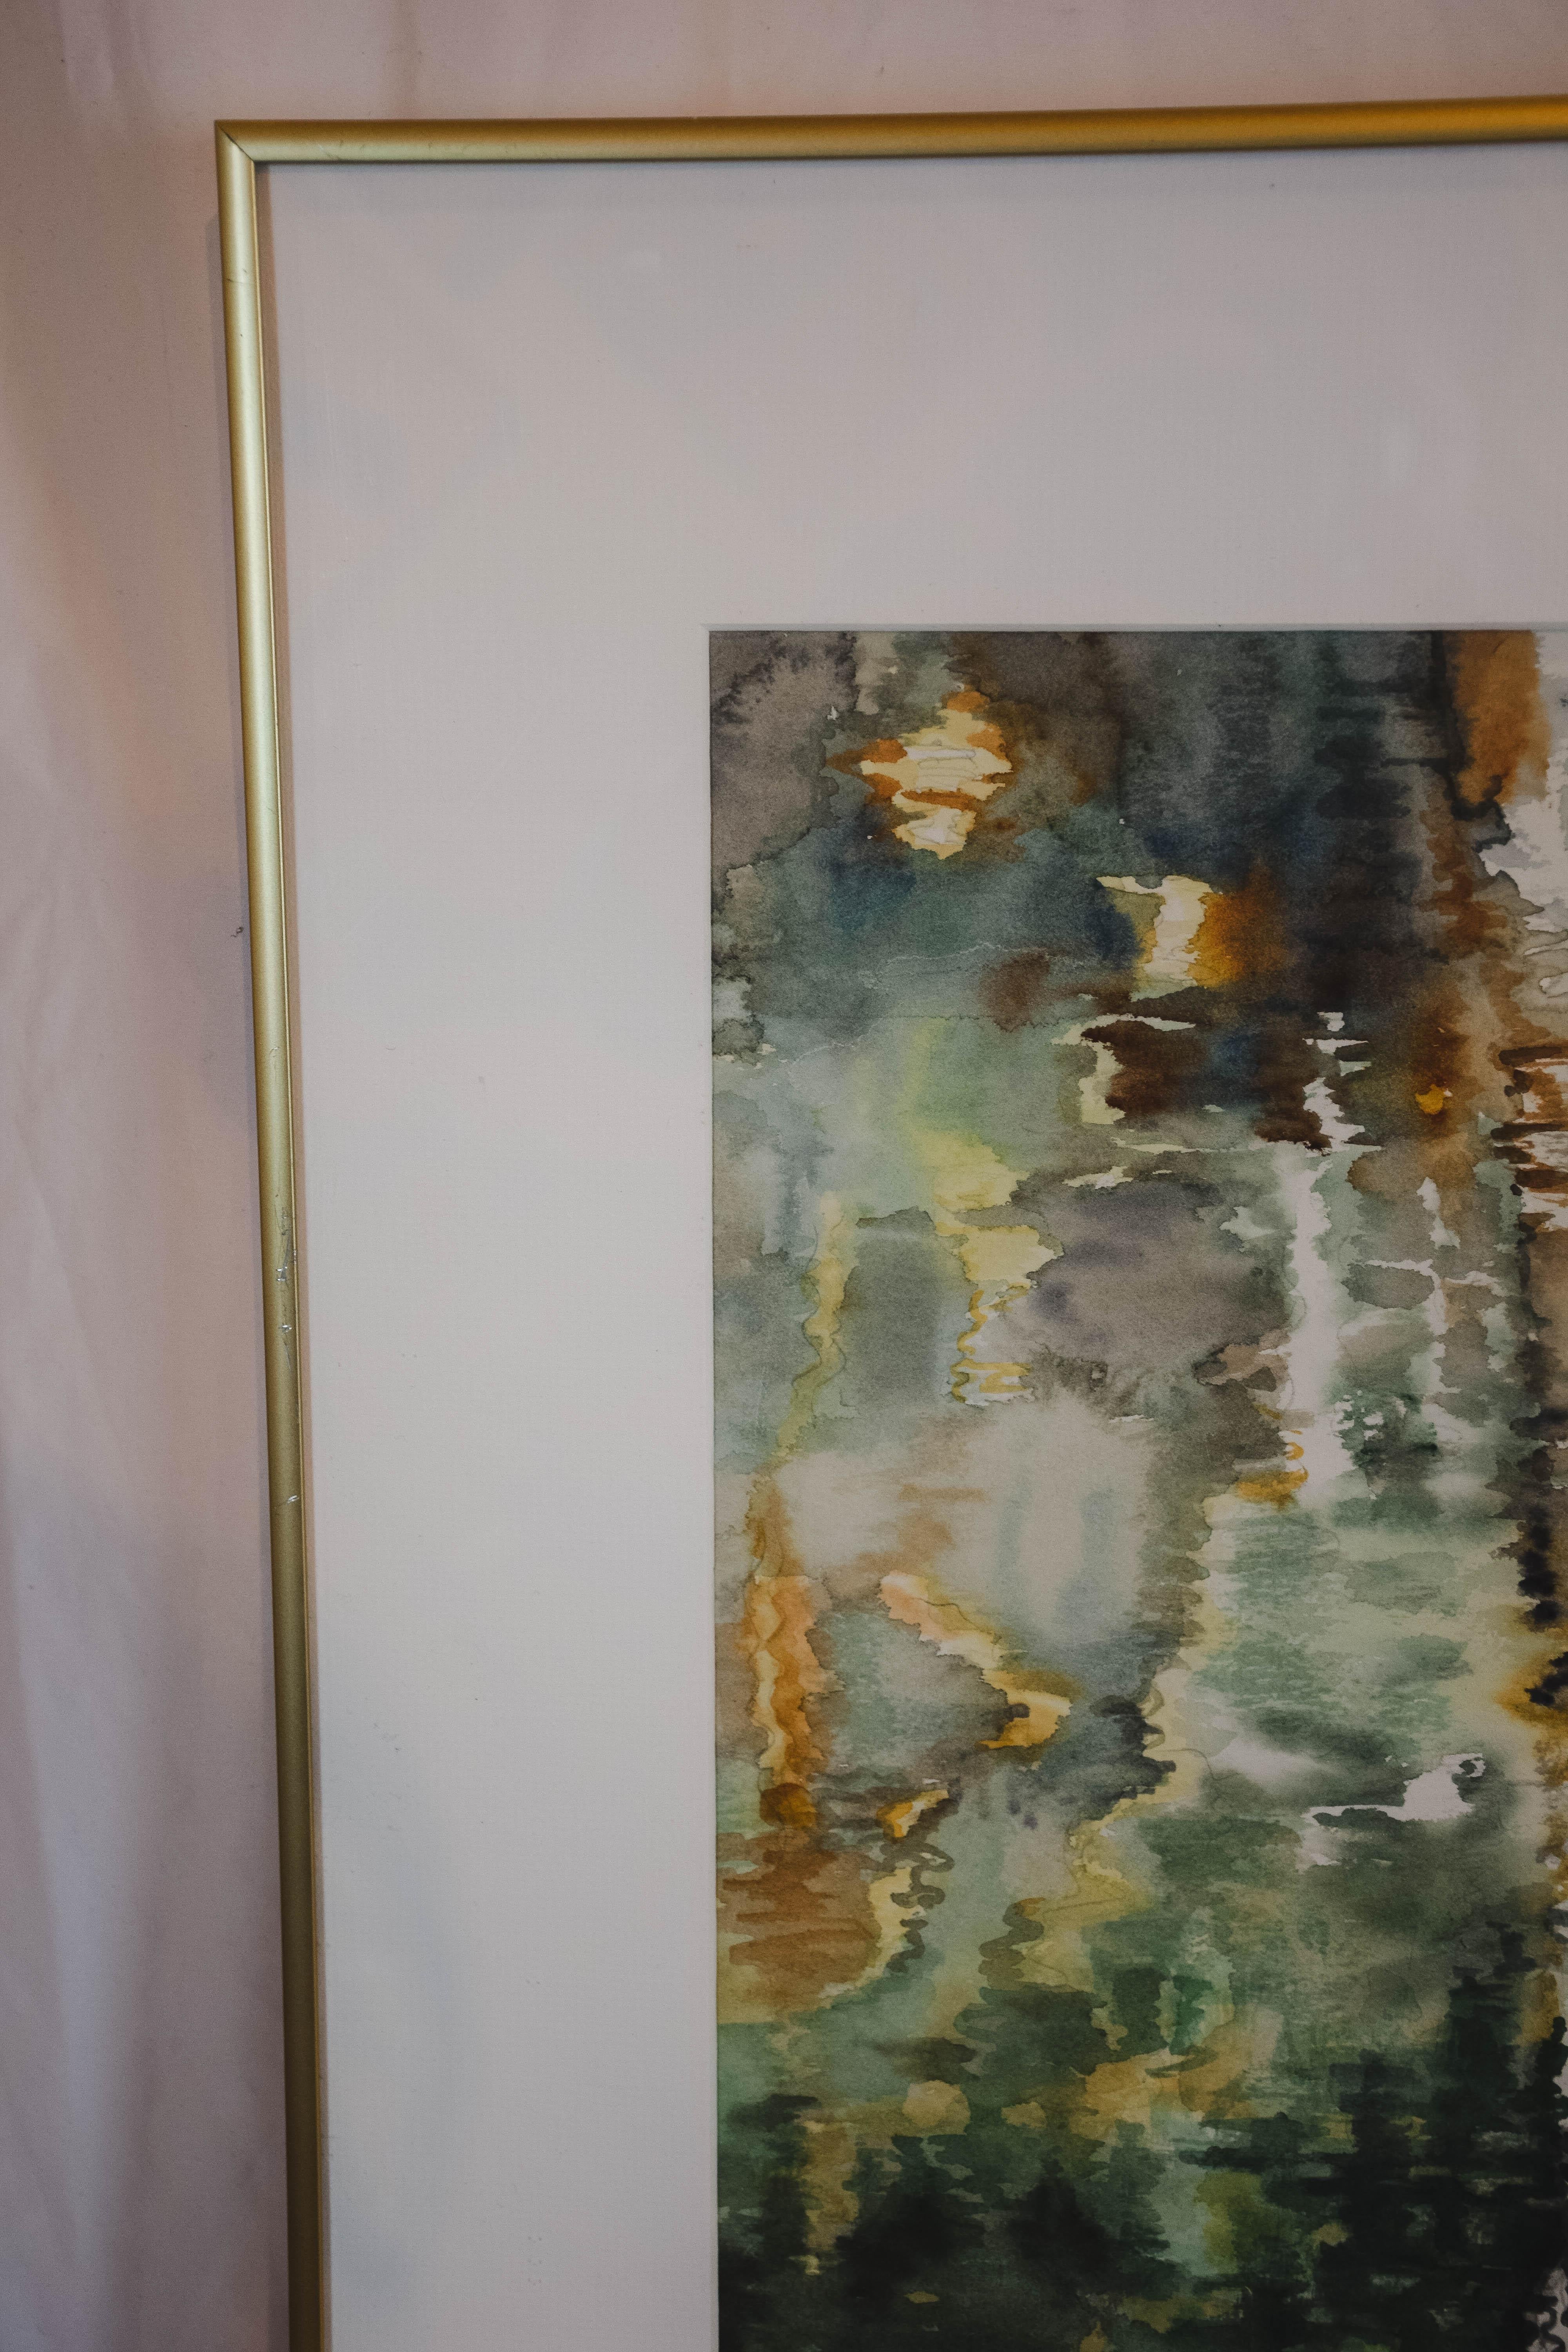 North American Abstract Watercolor by Artist Peggy Hoekman